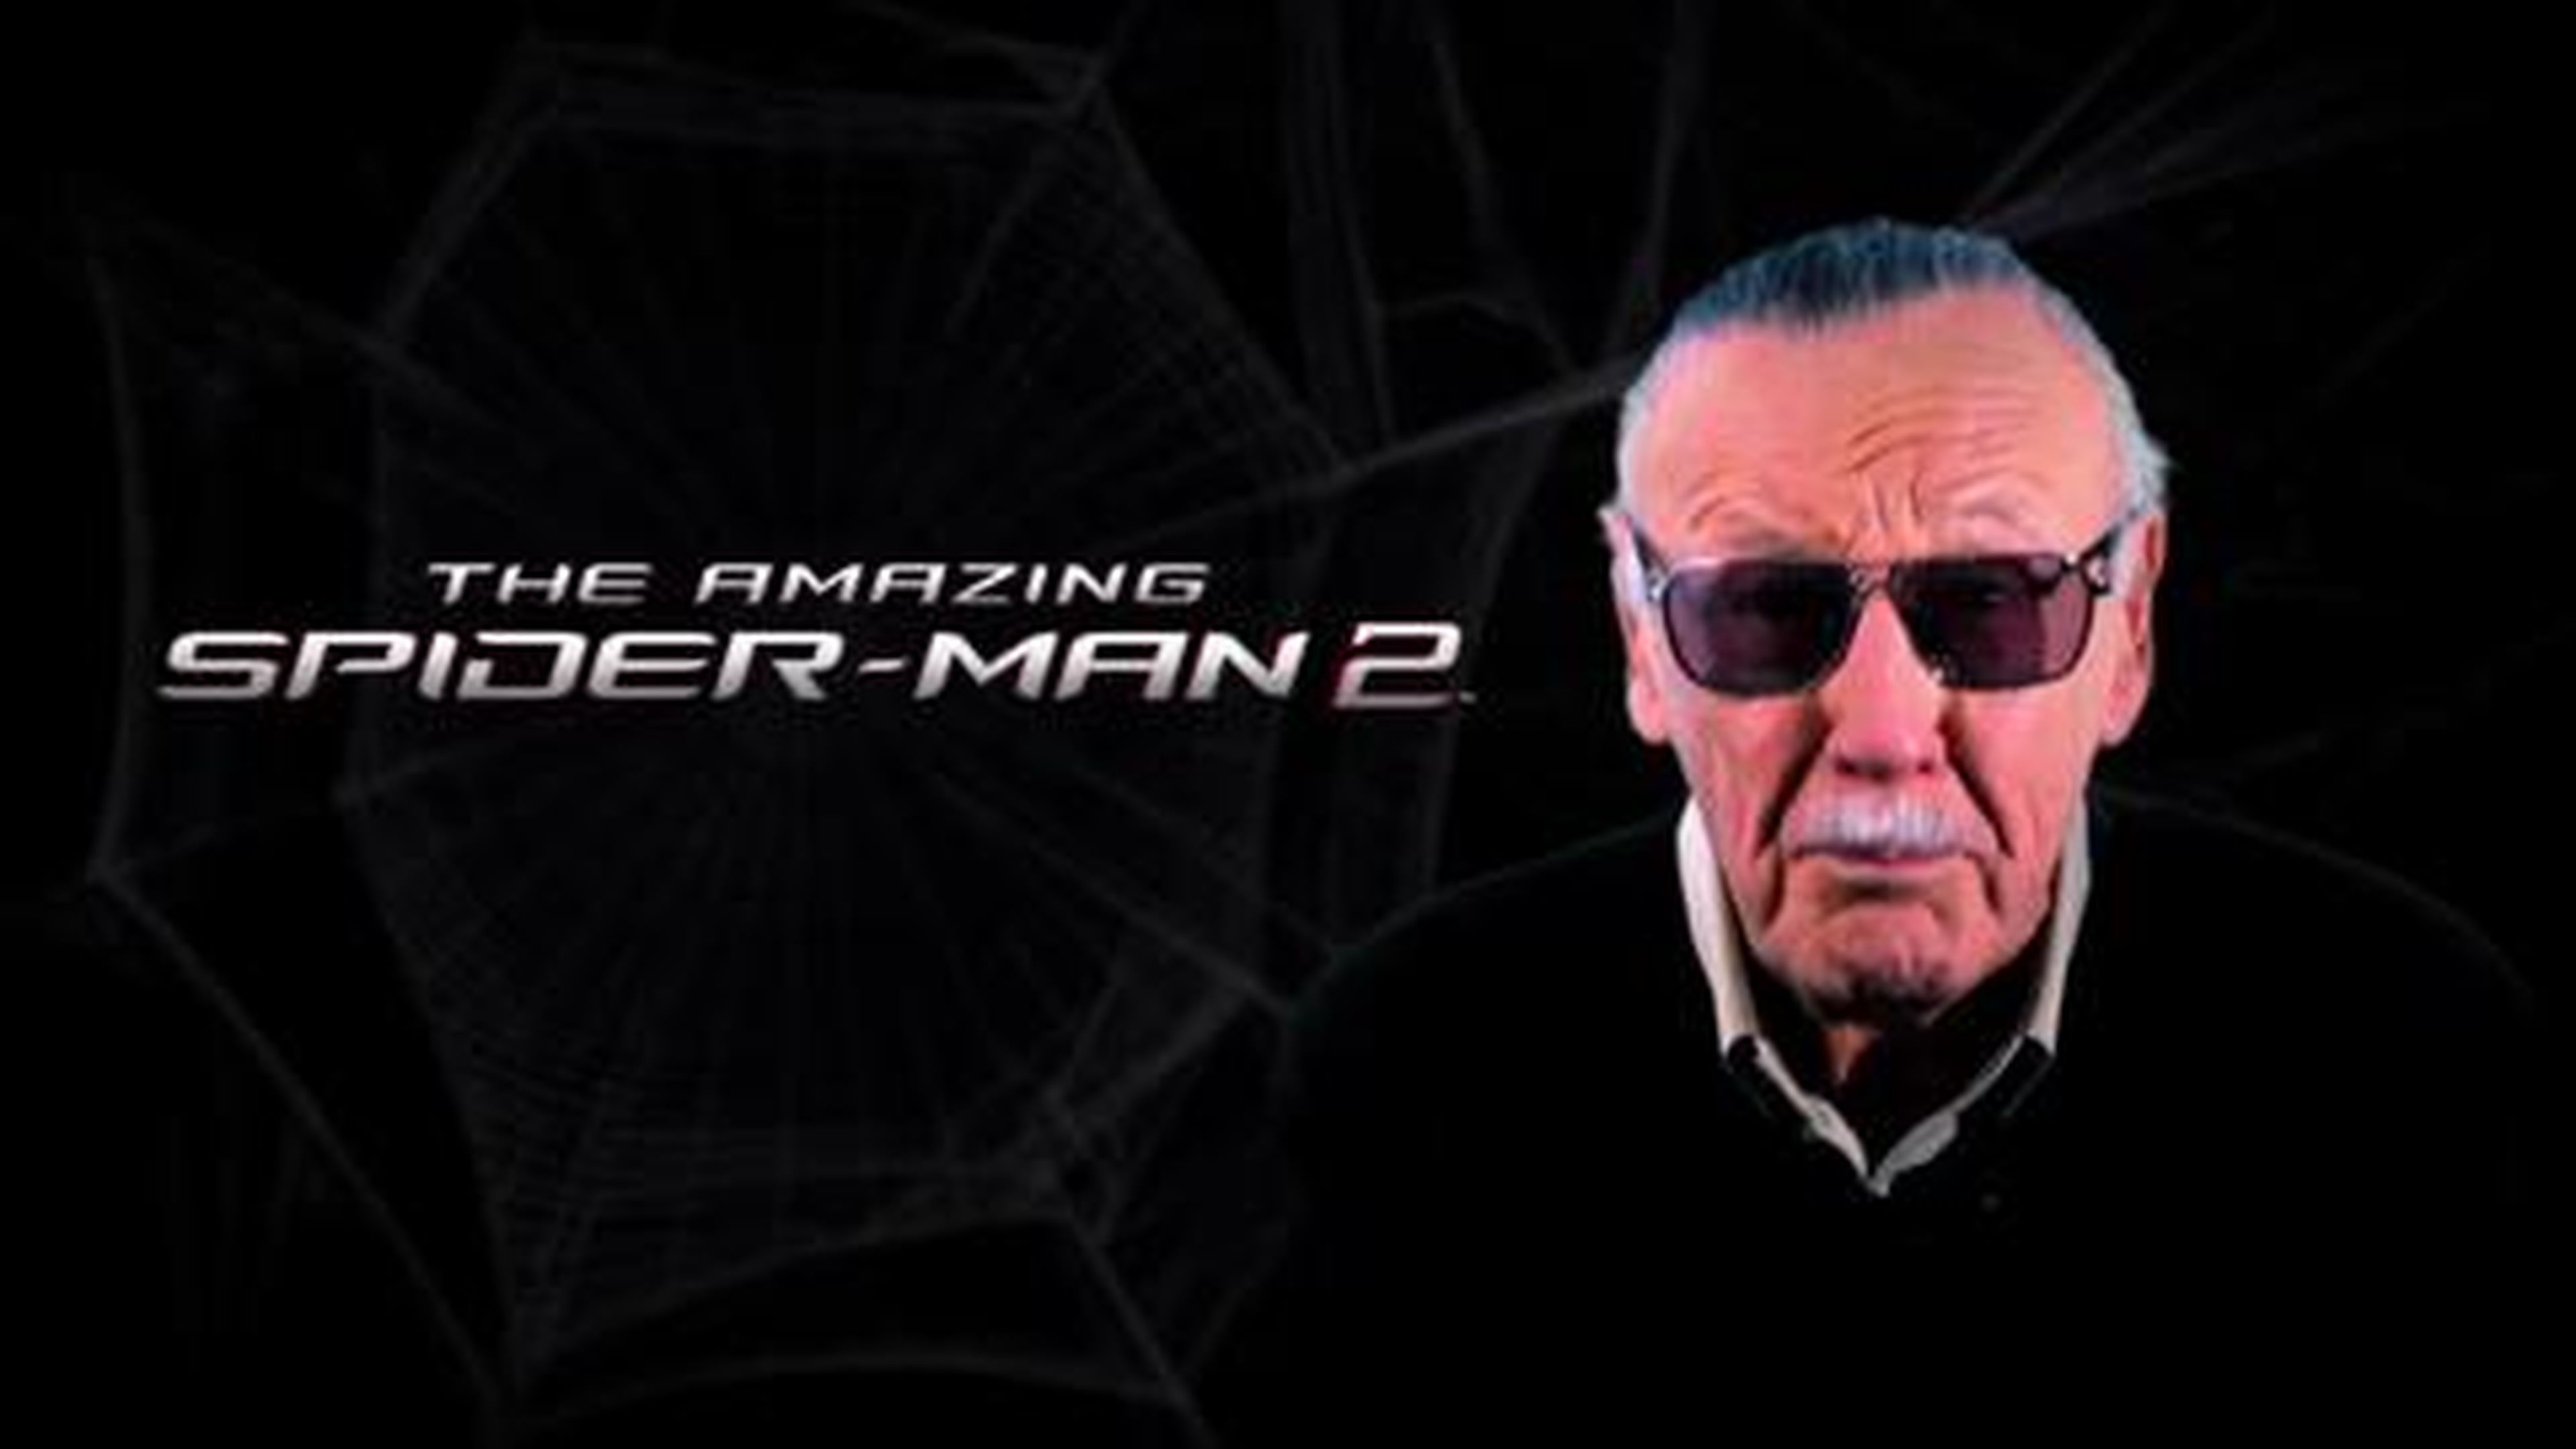 Stan Lee in The Amazing Spider-Man 2